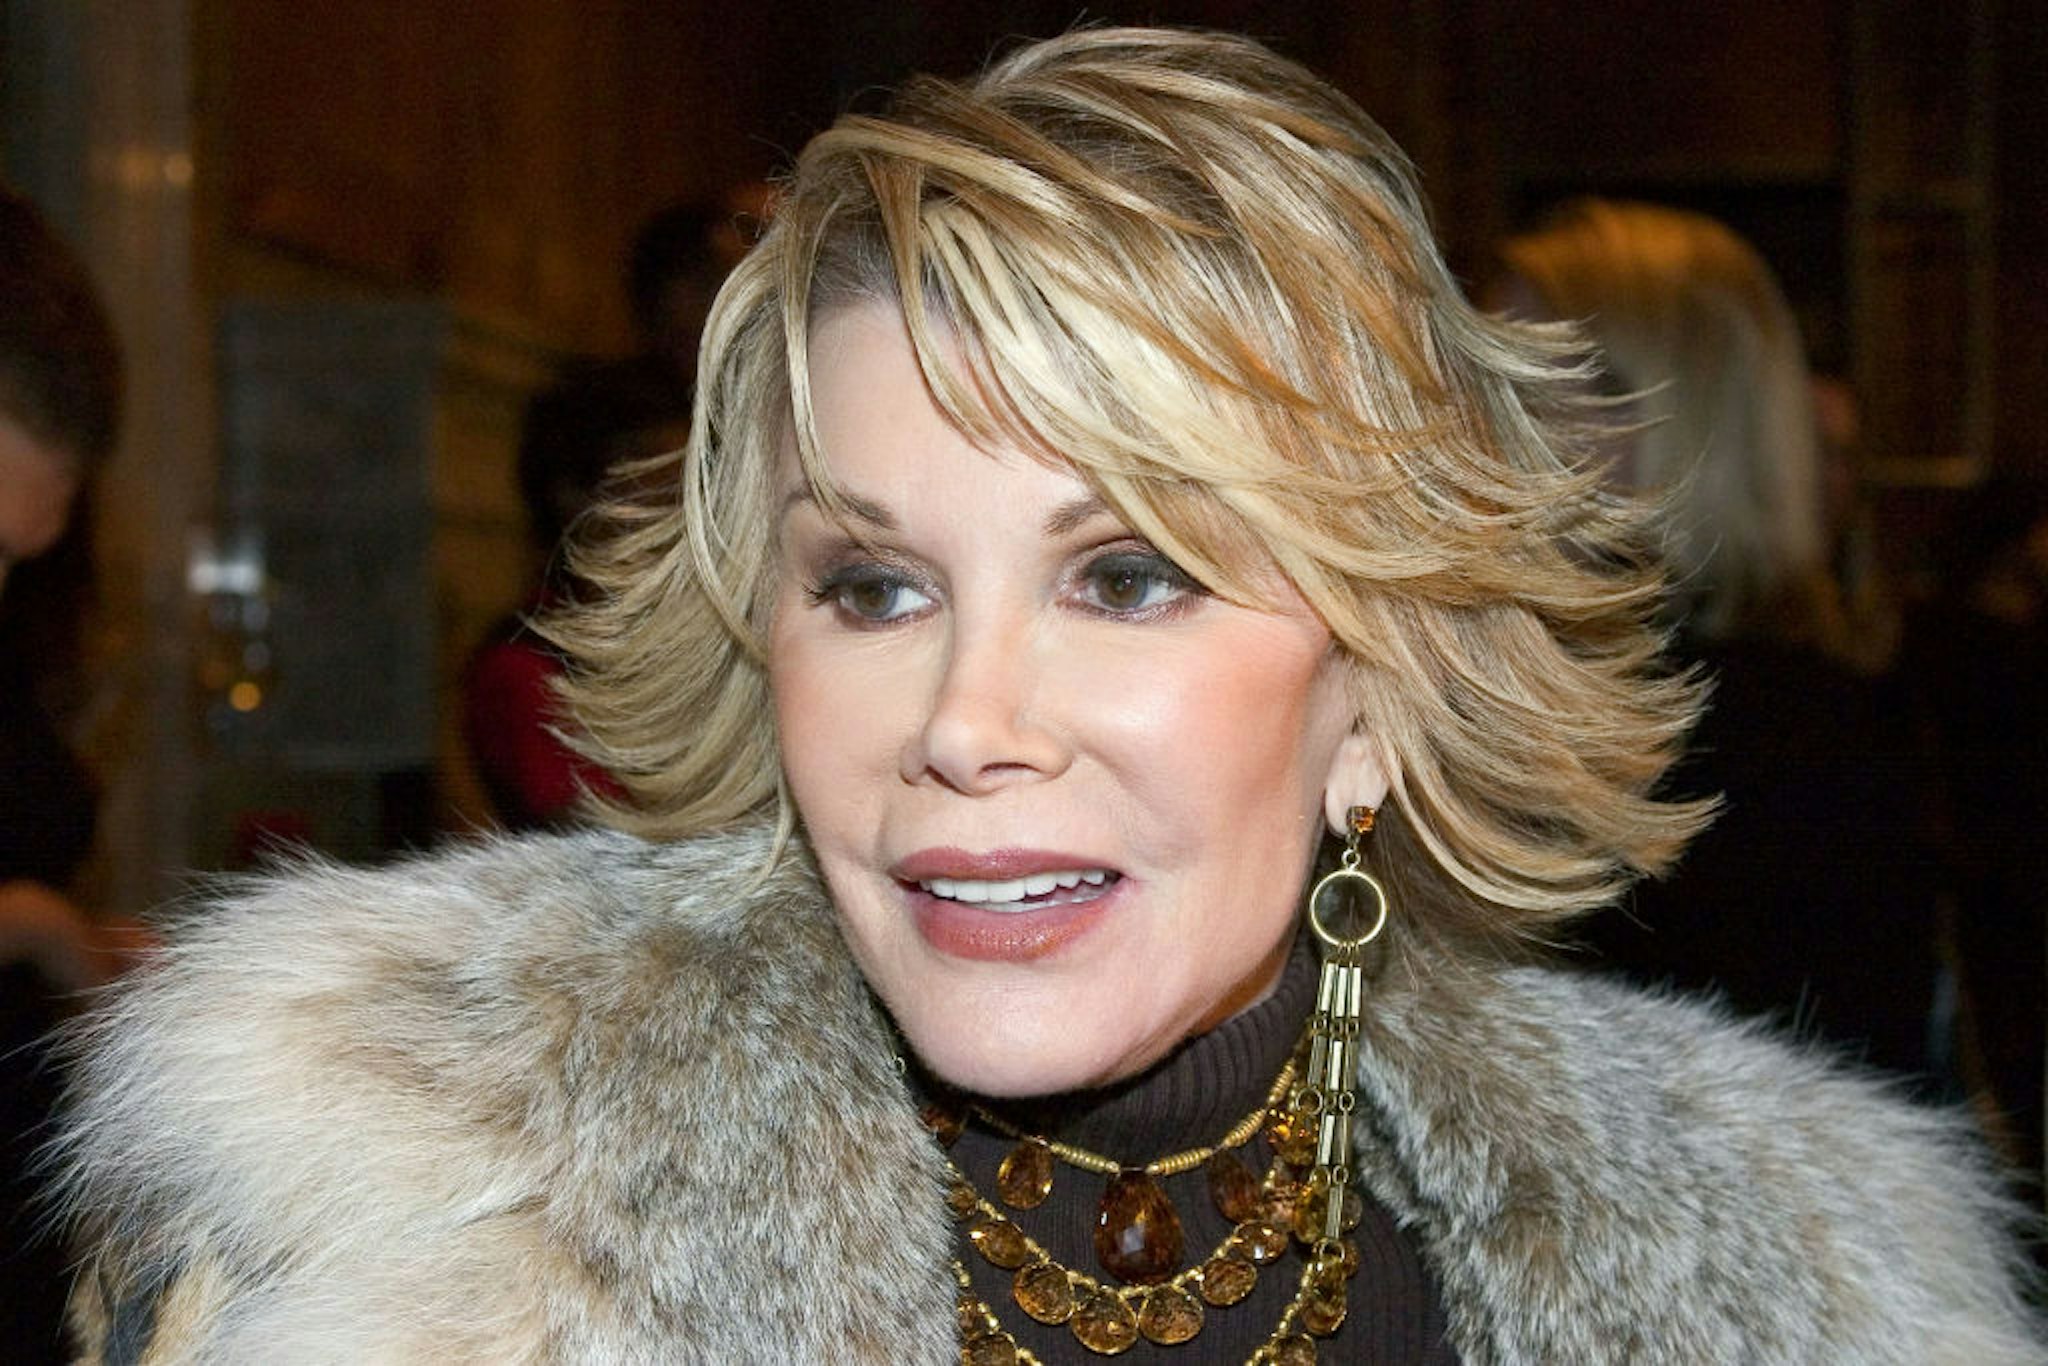 NEW YORK - OCTOBER 25: Television personality Joan Rivers arrives for the Banana Republic 2005 Spring Collection at the New York Public Library October 25, 2004 in New York City. (Photo by Astrid Stawiarz/Getty Images)